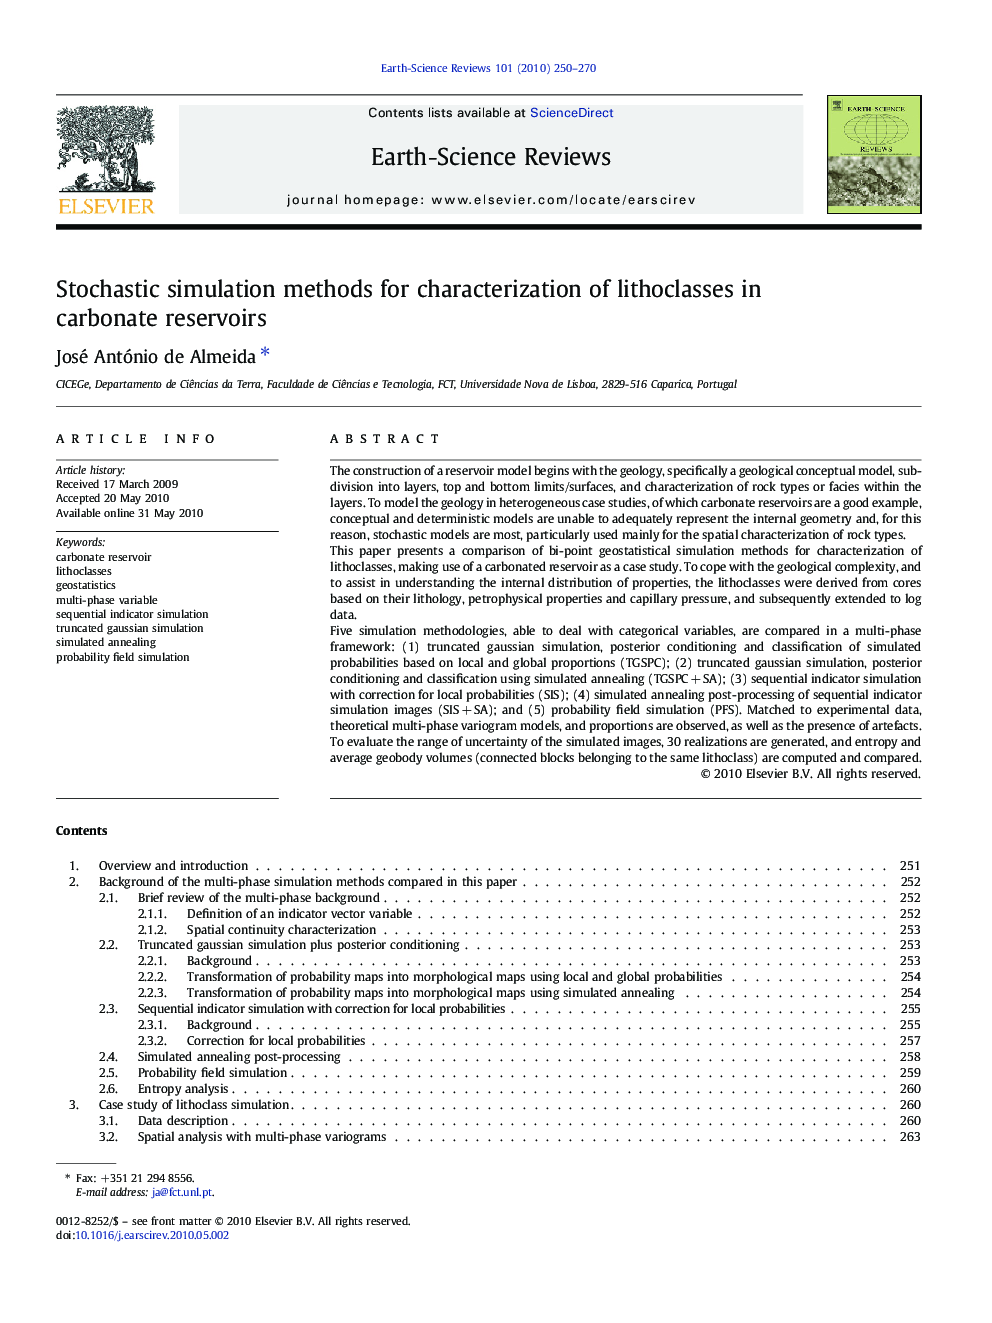 Stochastic simulation methods for characterization of lithoclasses in carbonate reservoirs